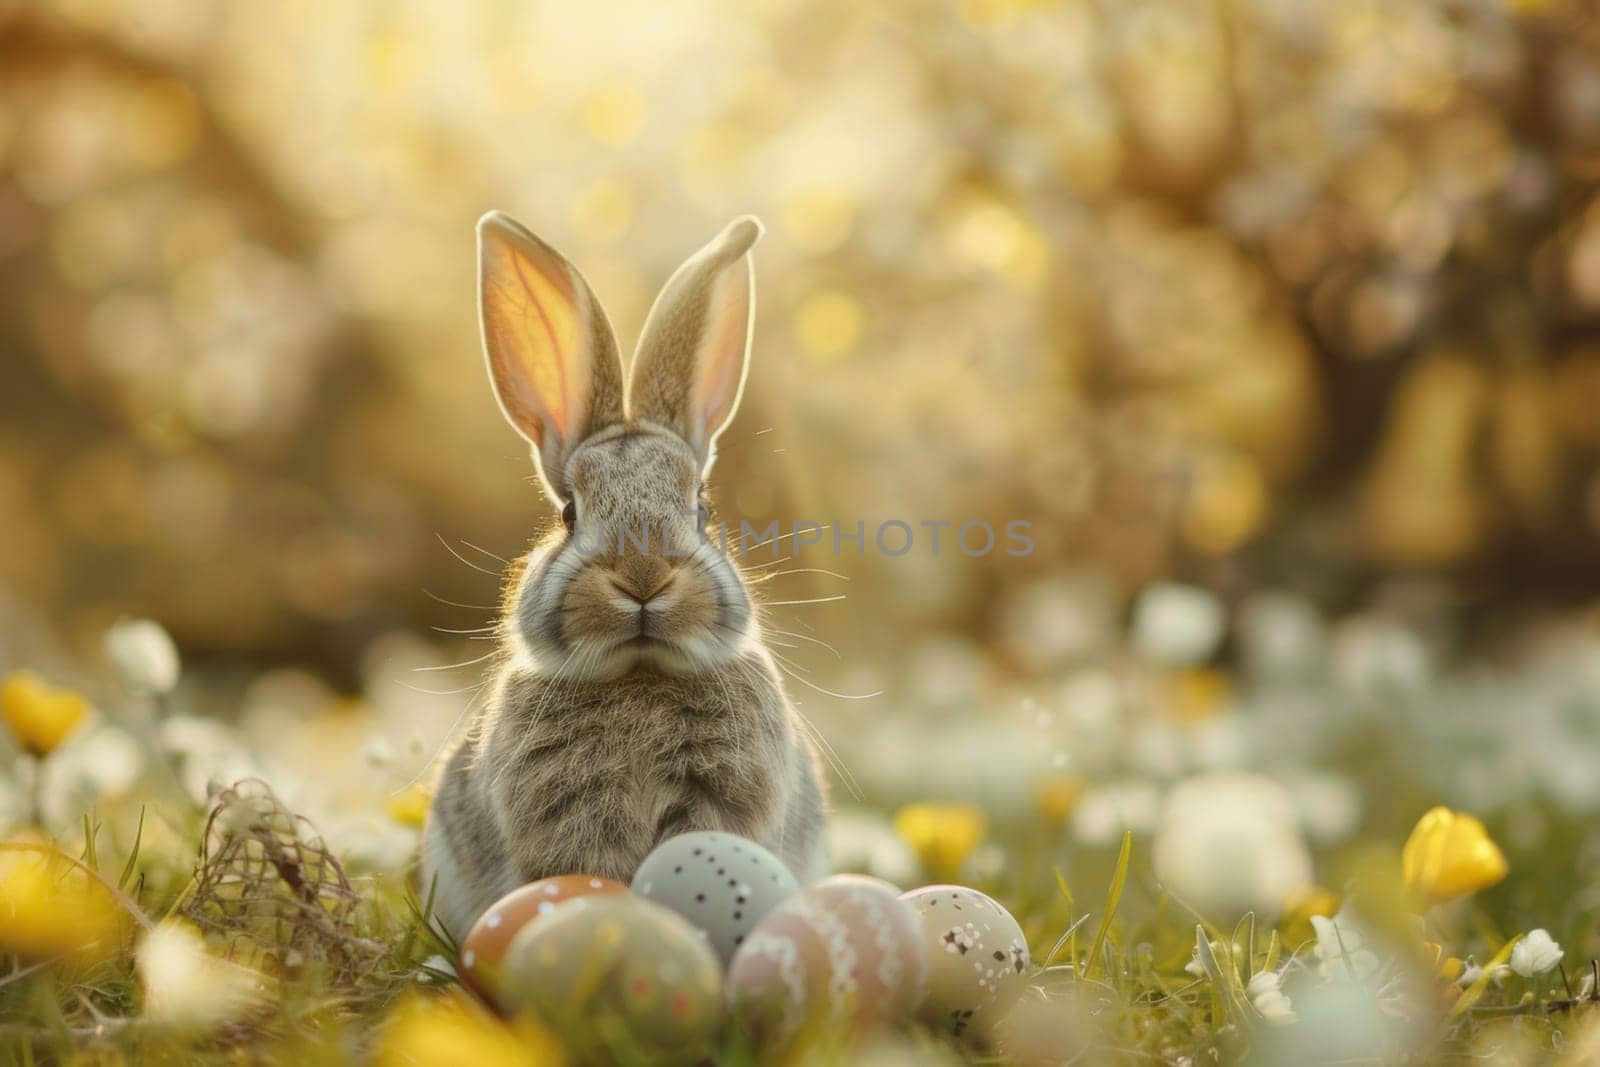 A rabbit is sitting in a field of yellow flowers and eggs by nateemee